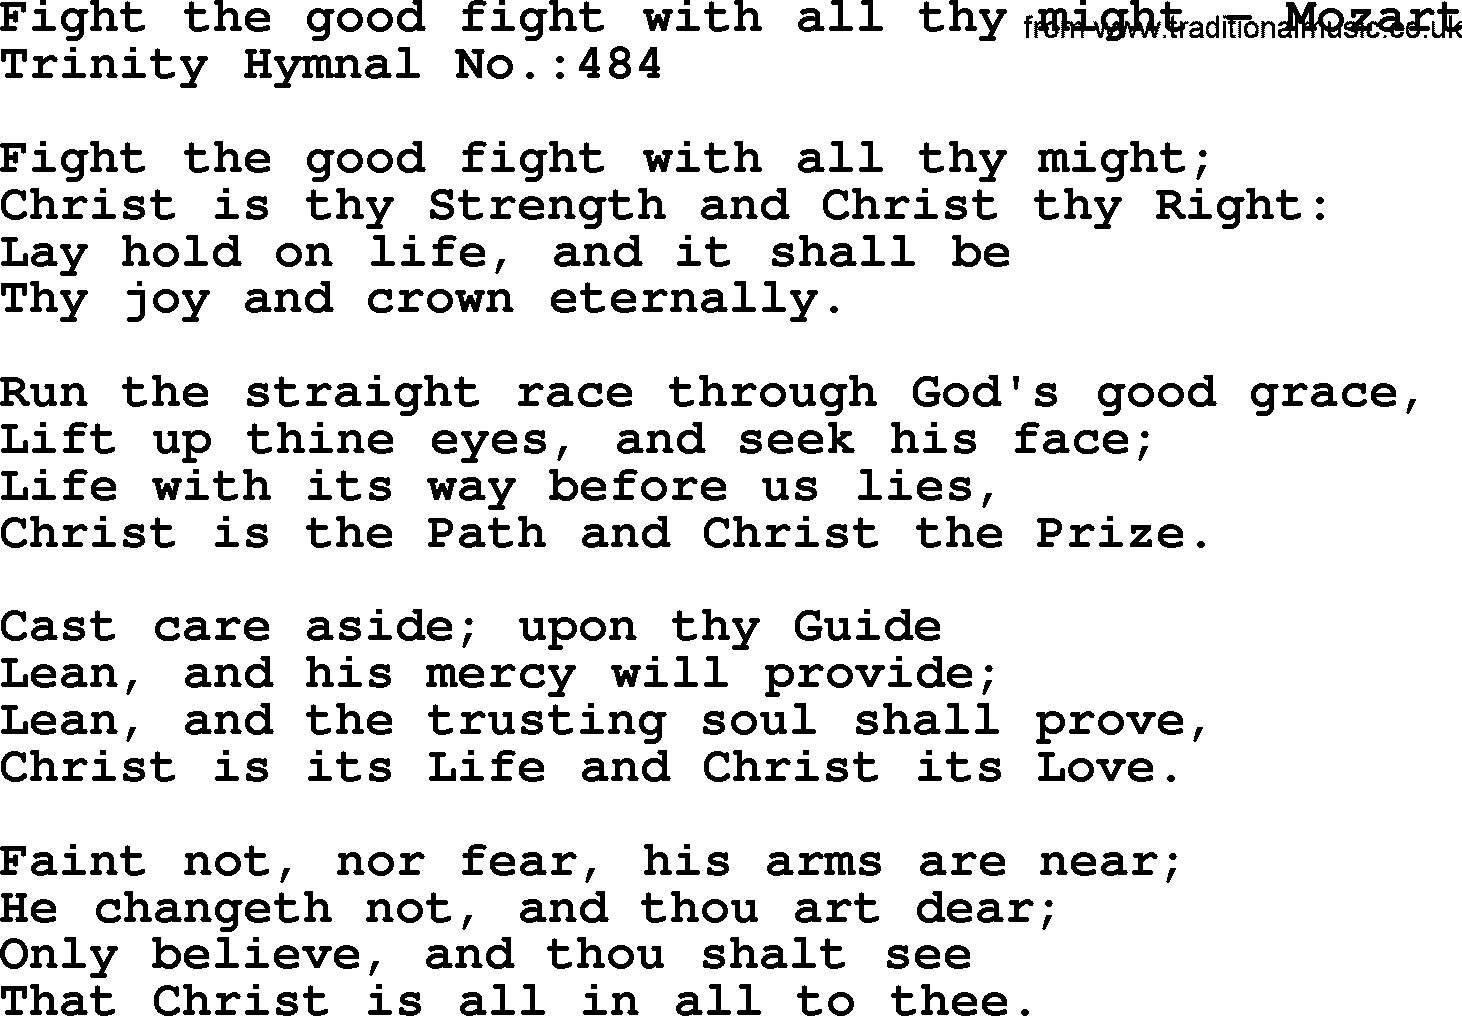 Trinity Hymnal Hymn: Fight The Good Fight With All Thy Might--Mozart, lyrics with midi music